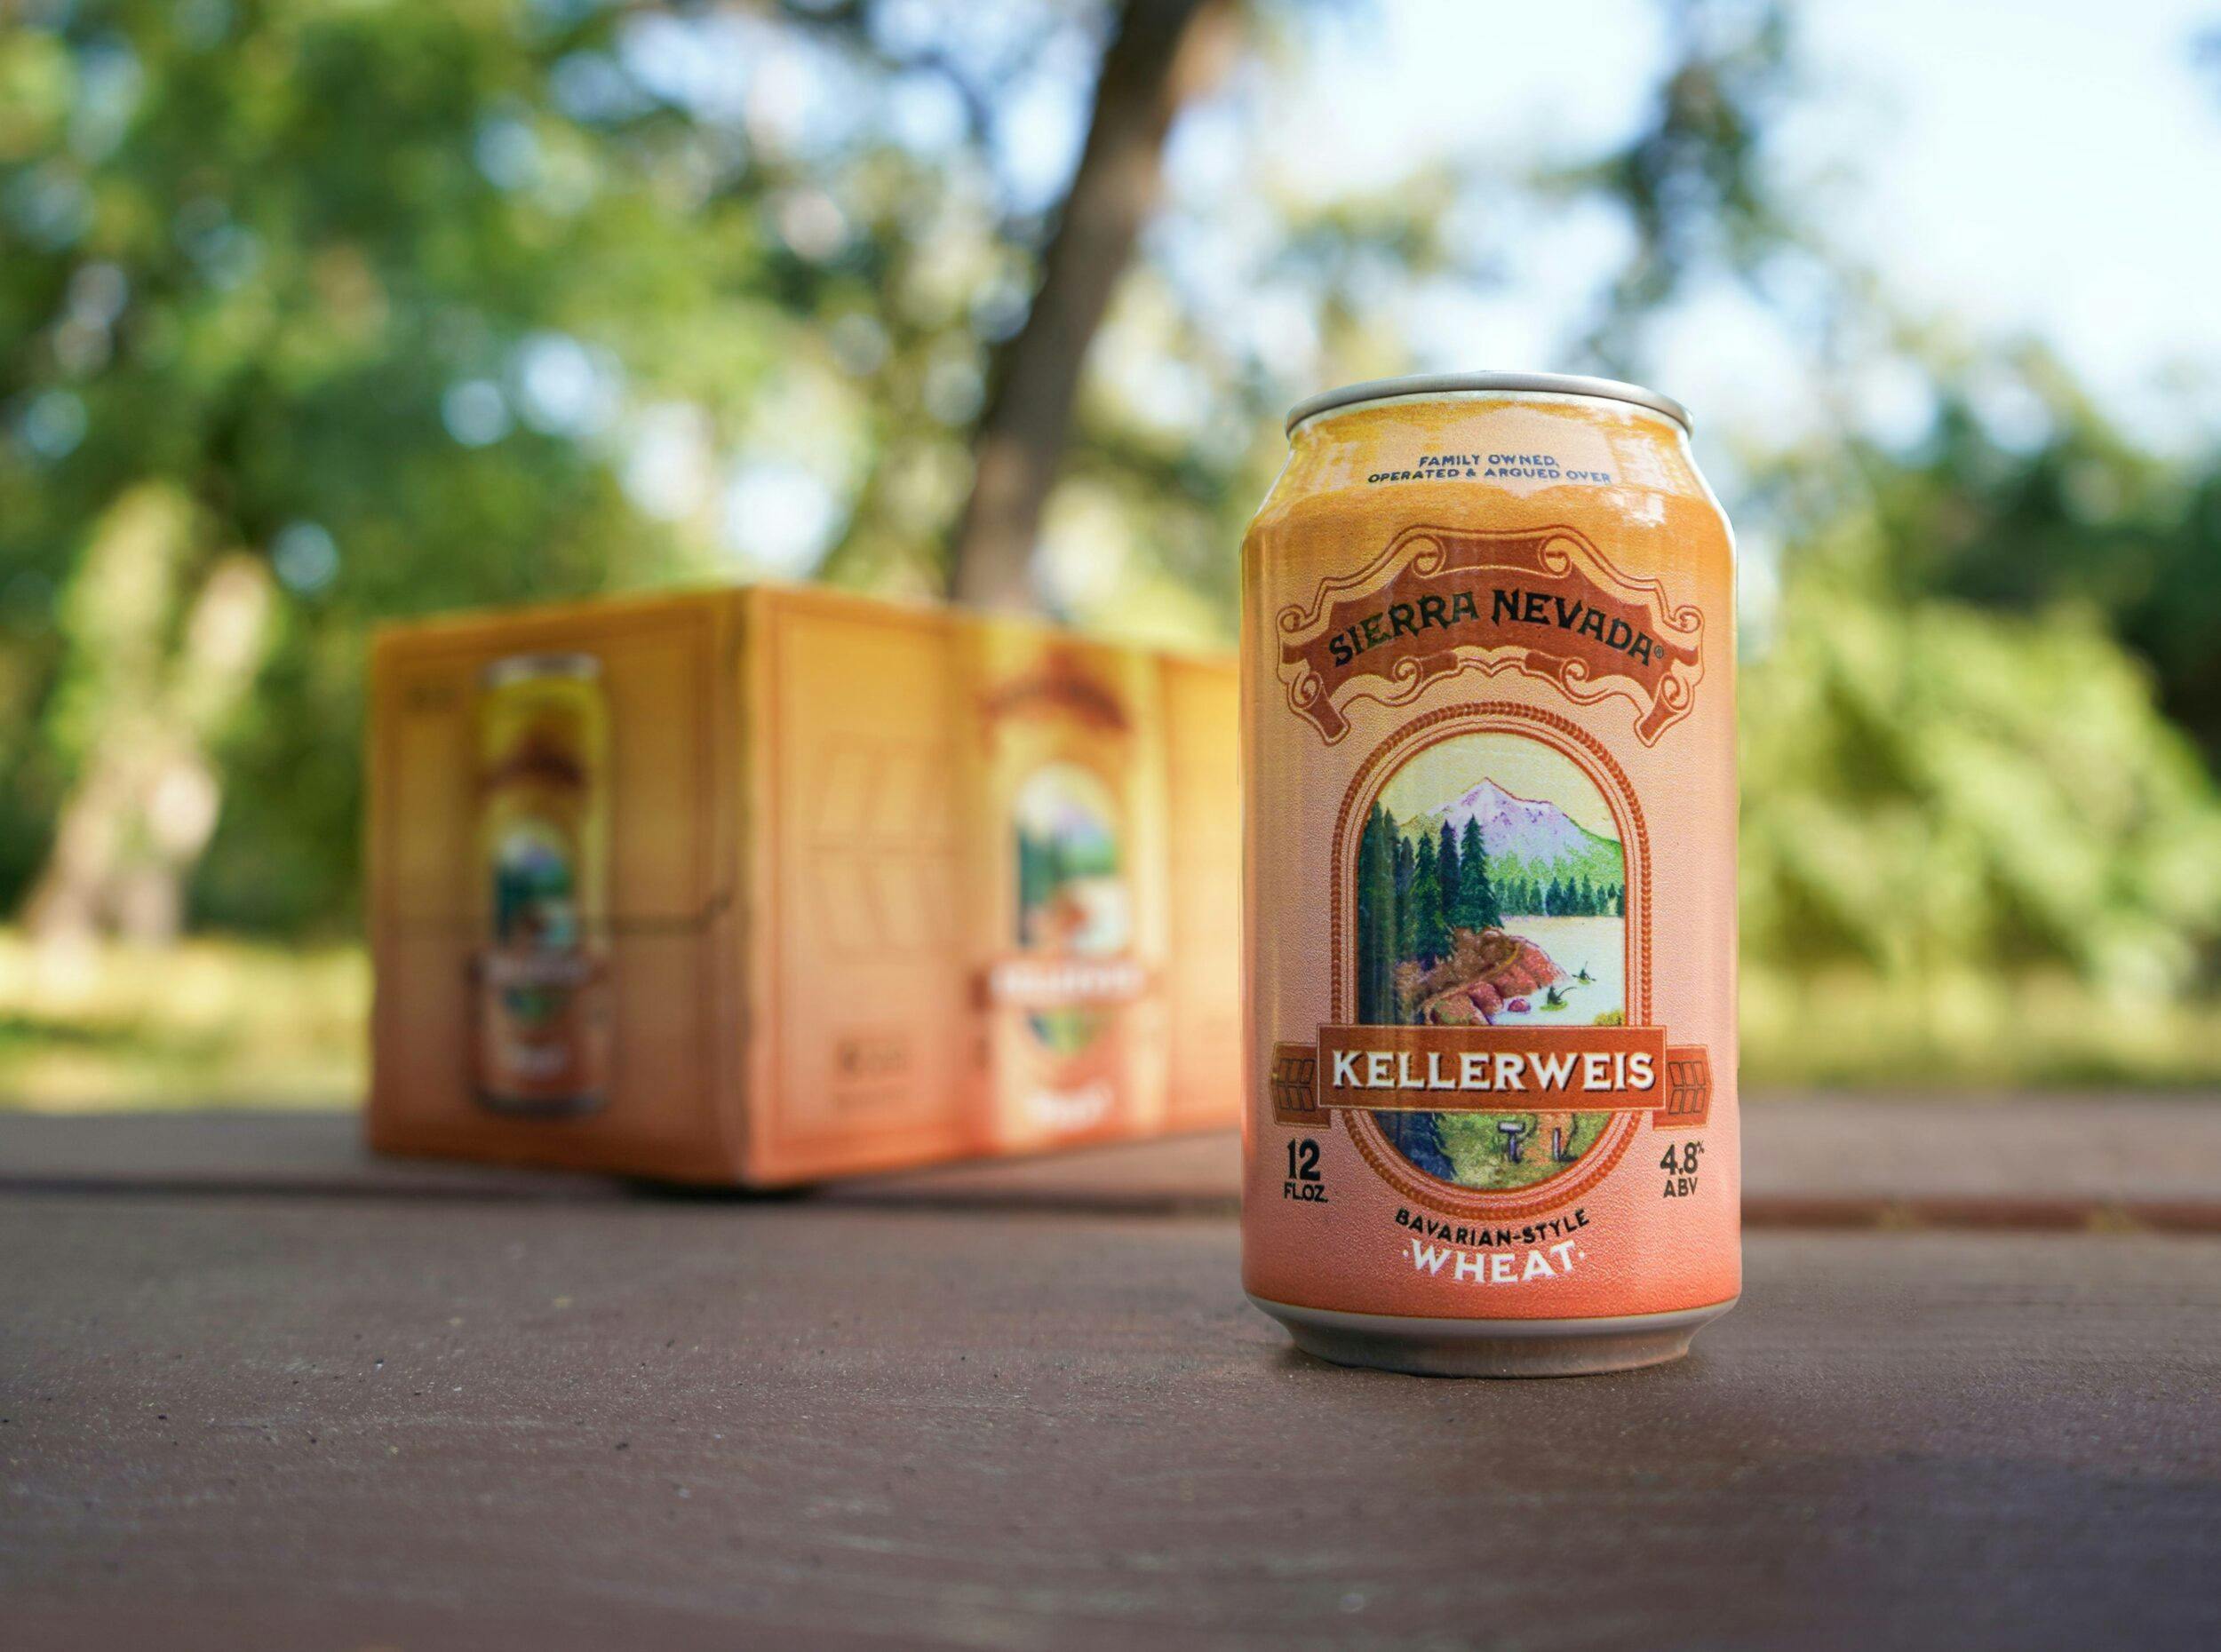 Kellerweis 6-pack and can outside on table